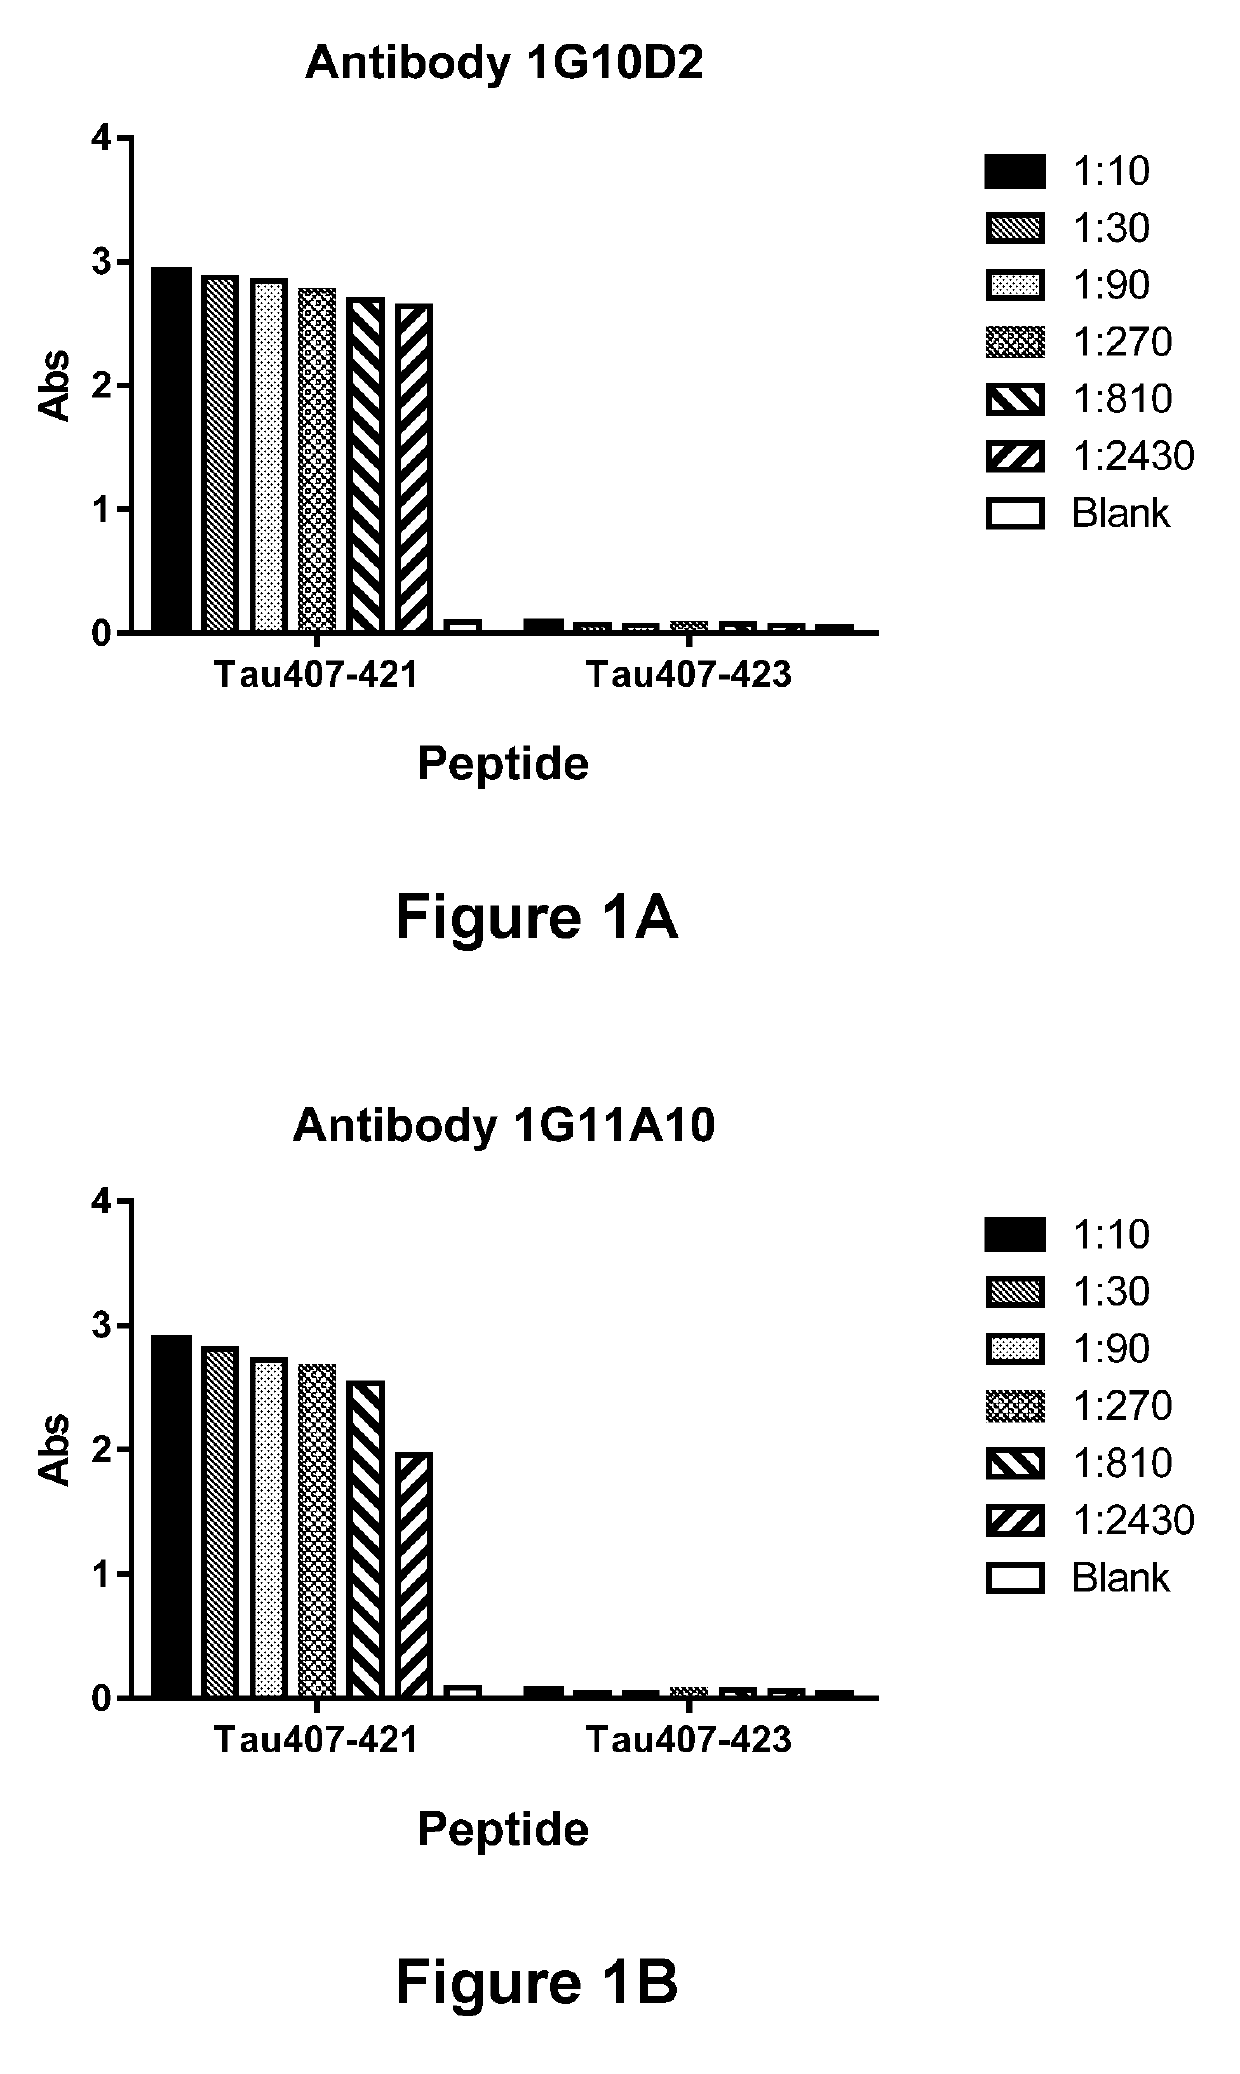 Antibody-Based Molecules Specific for the Truncated ASP421 Epitope of Tau and Their Uses in the Diagnosis and Treatment of Tauopathy